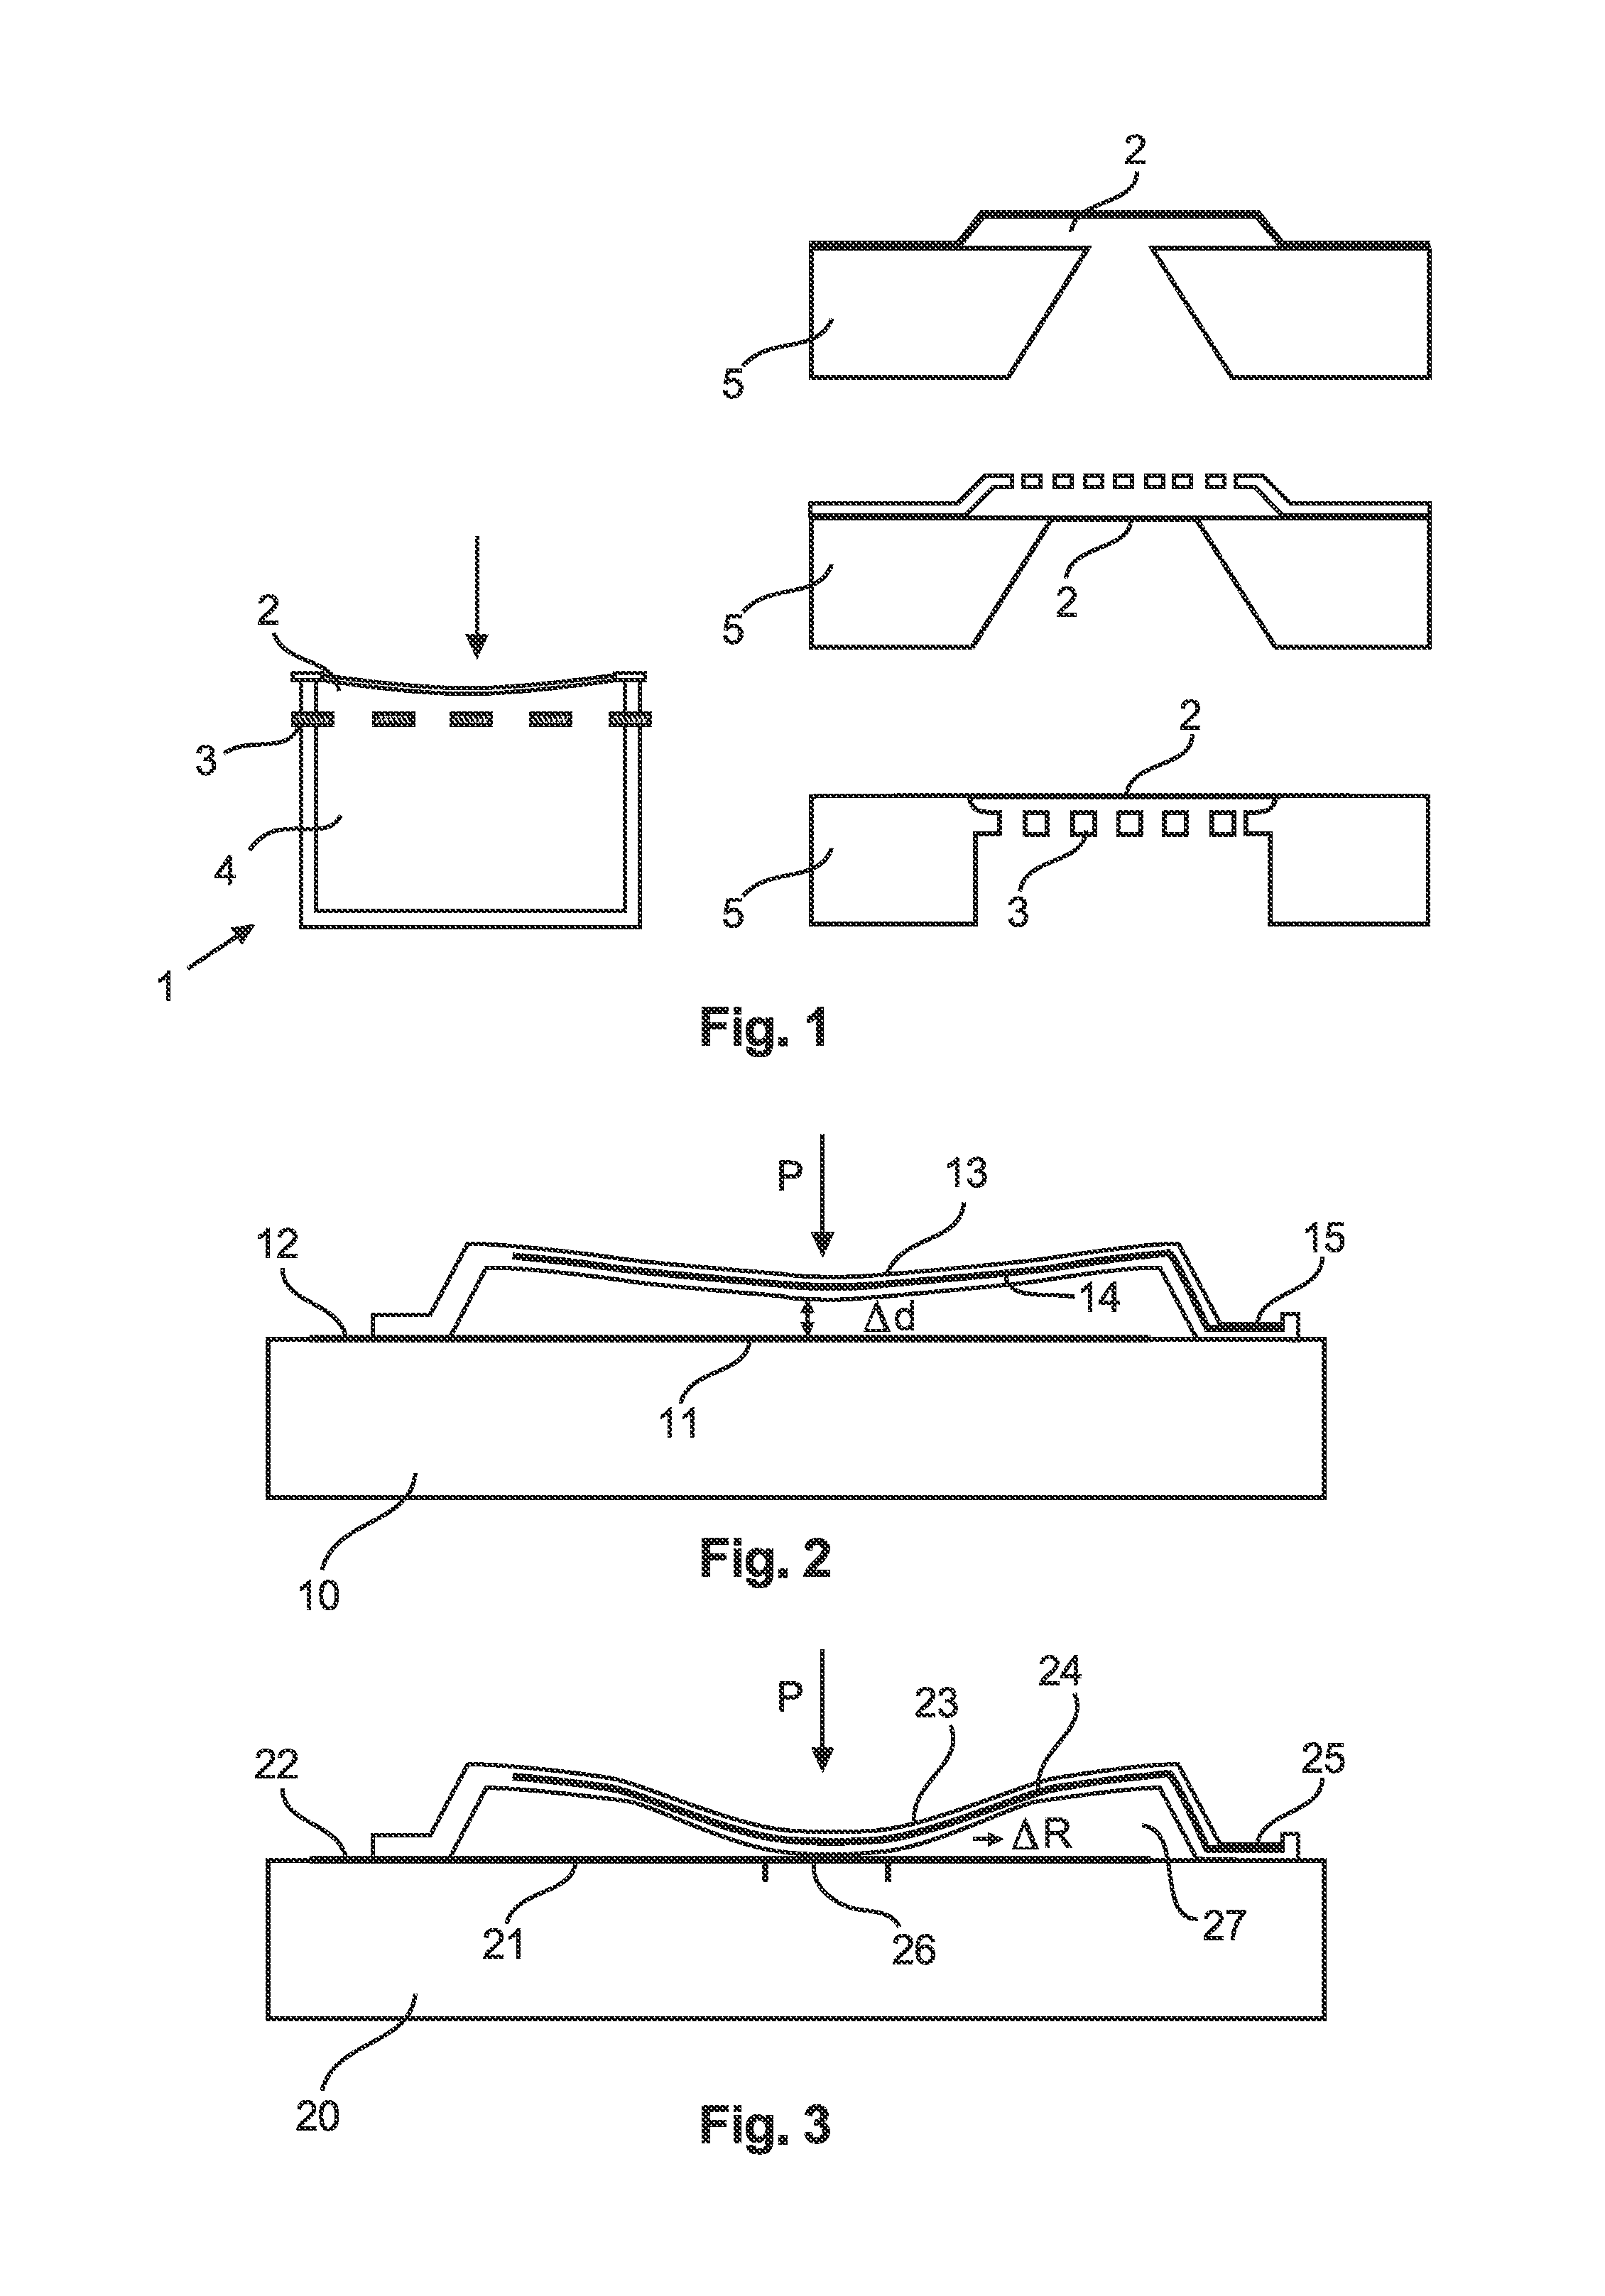 Collapsed mode capacitive sensor